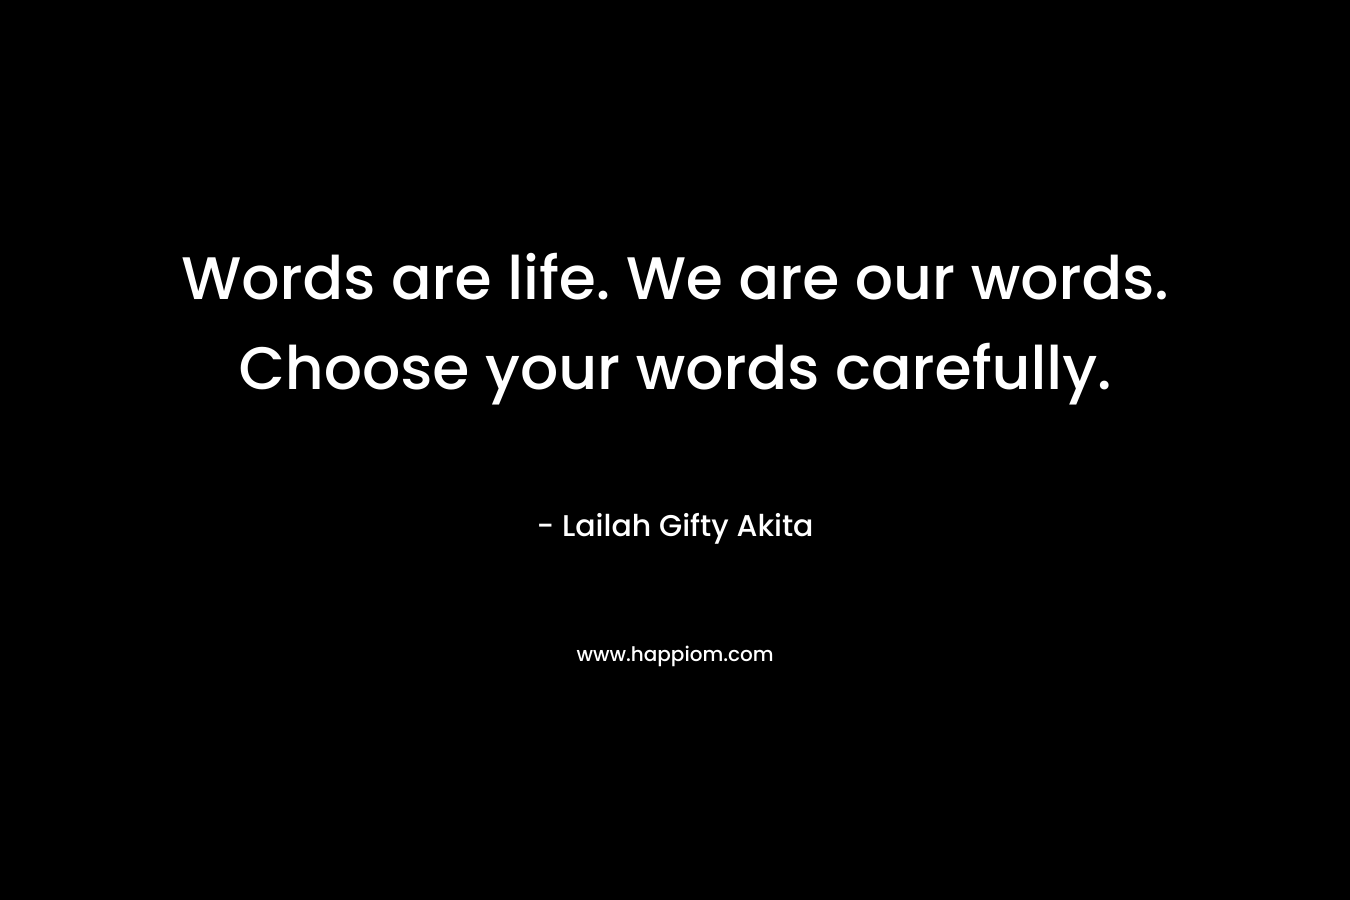 Words are life. We are our words. Choose your words carefully.